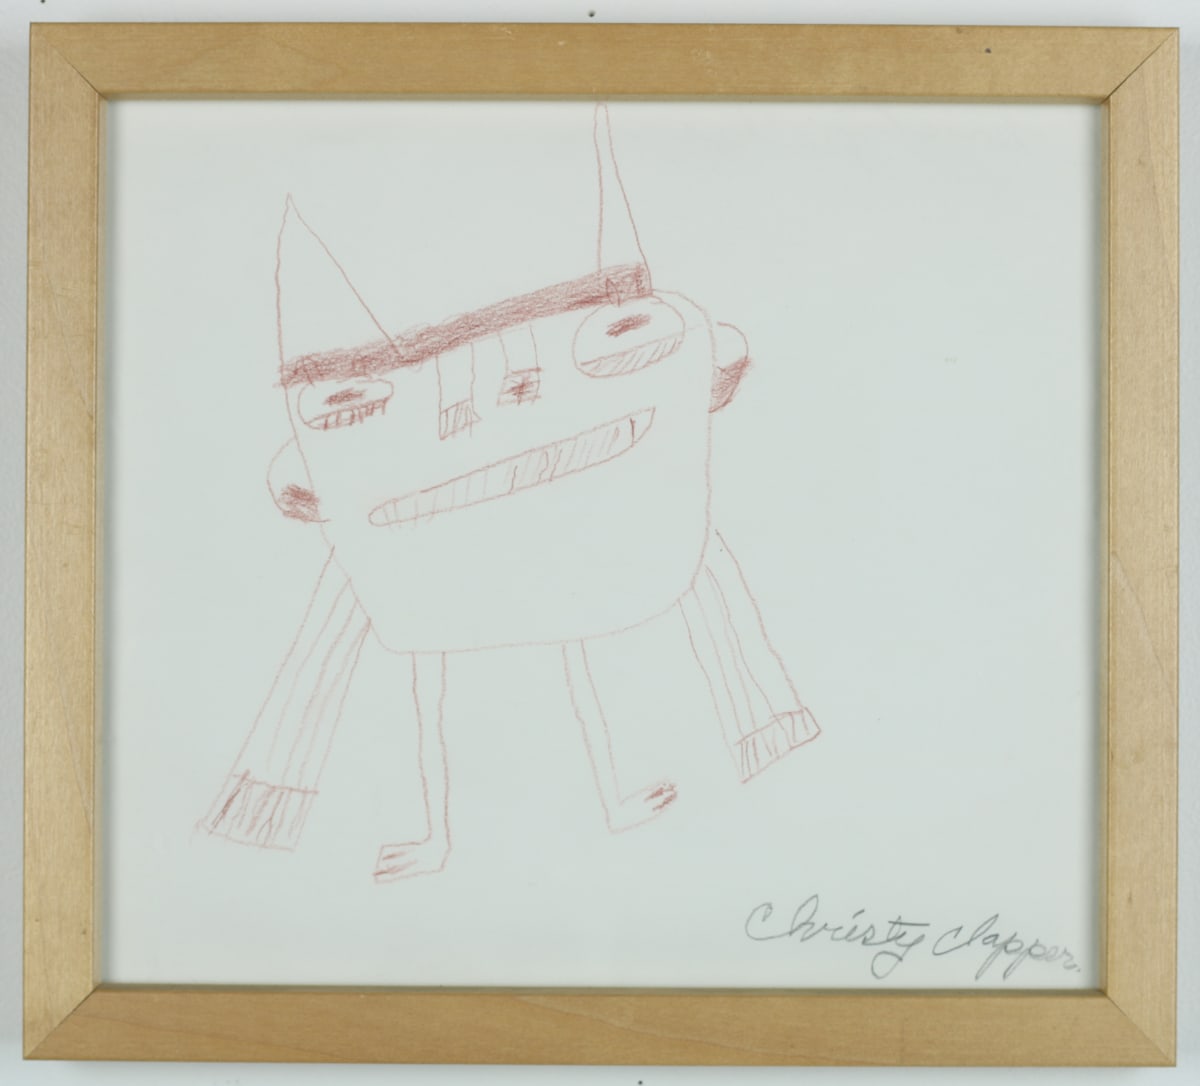 Untitled by Christy Clapper  Image: Brown pencil drawing of a smiling figure with arms and legs. 